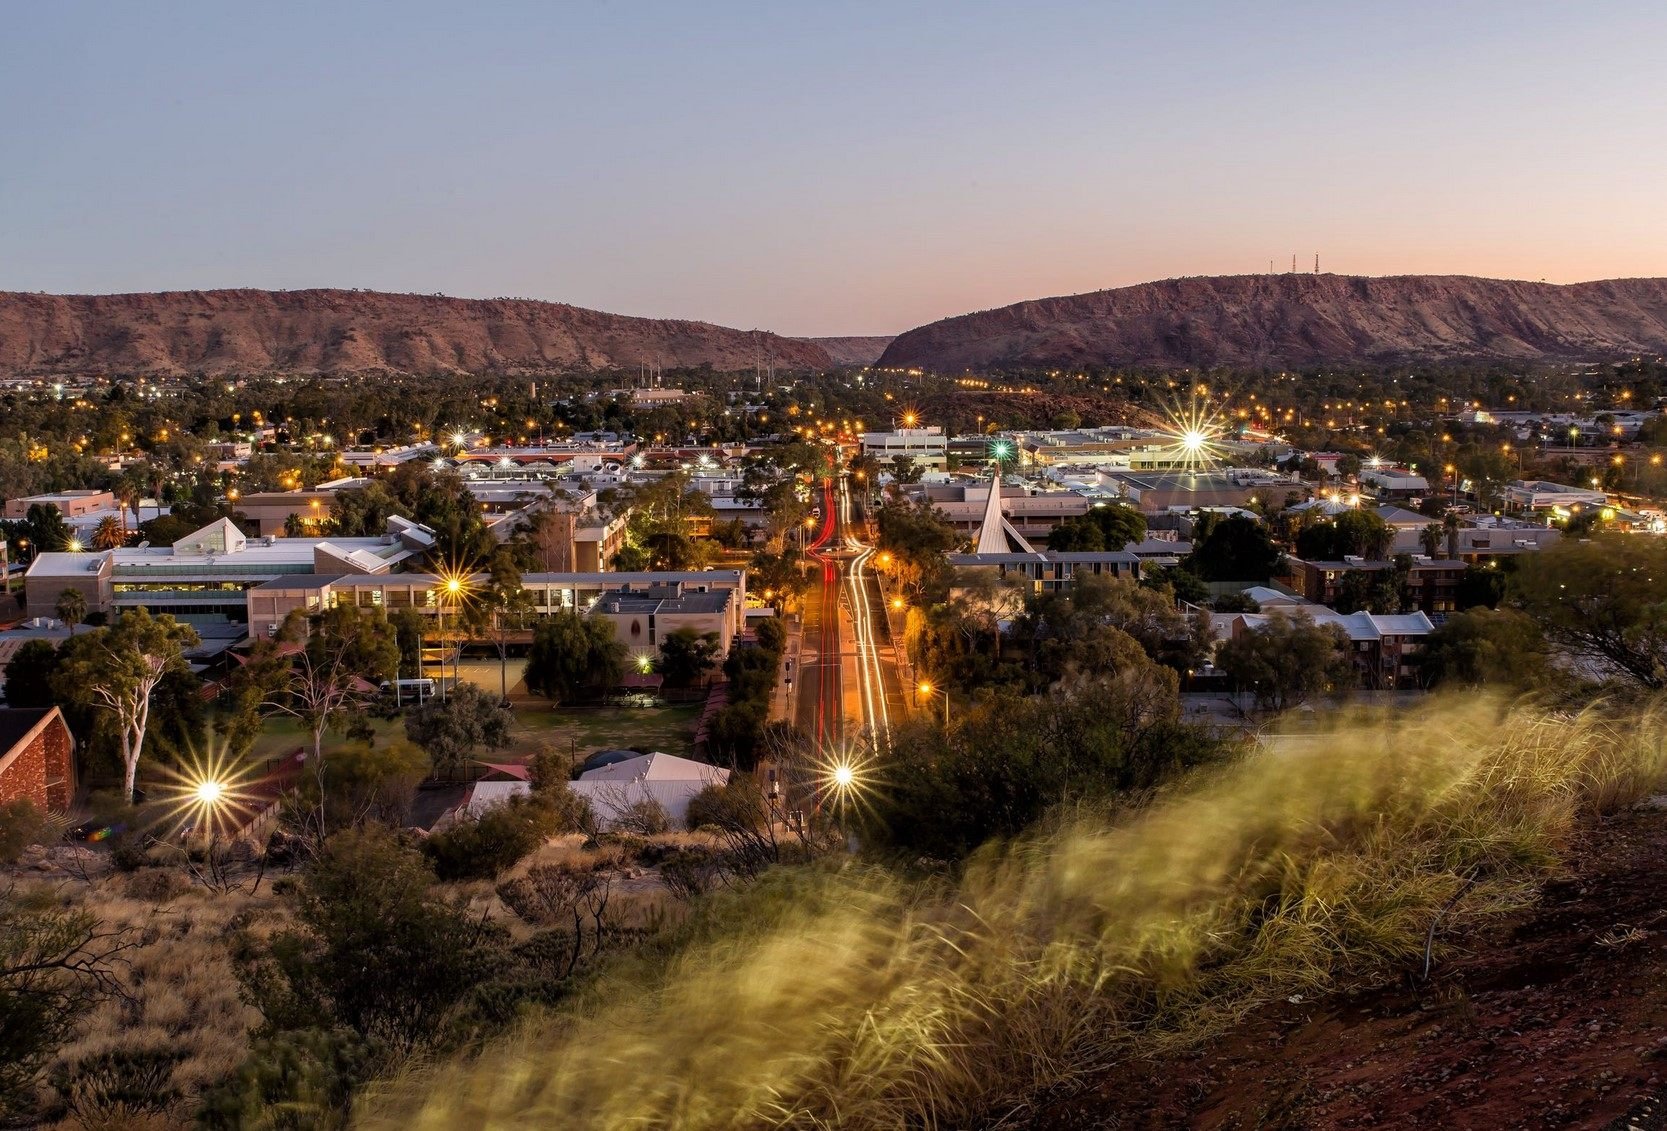 Authorities in the Australian outback town of Alice Springs have issued a curfew following a series of violent incidents. Photo: X/_alicesprings_